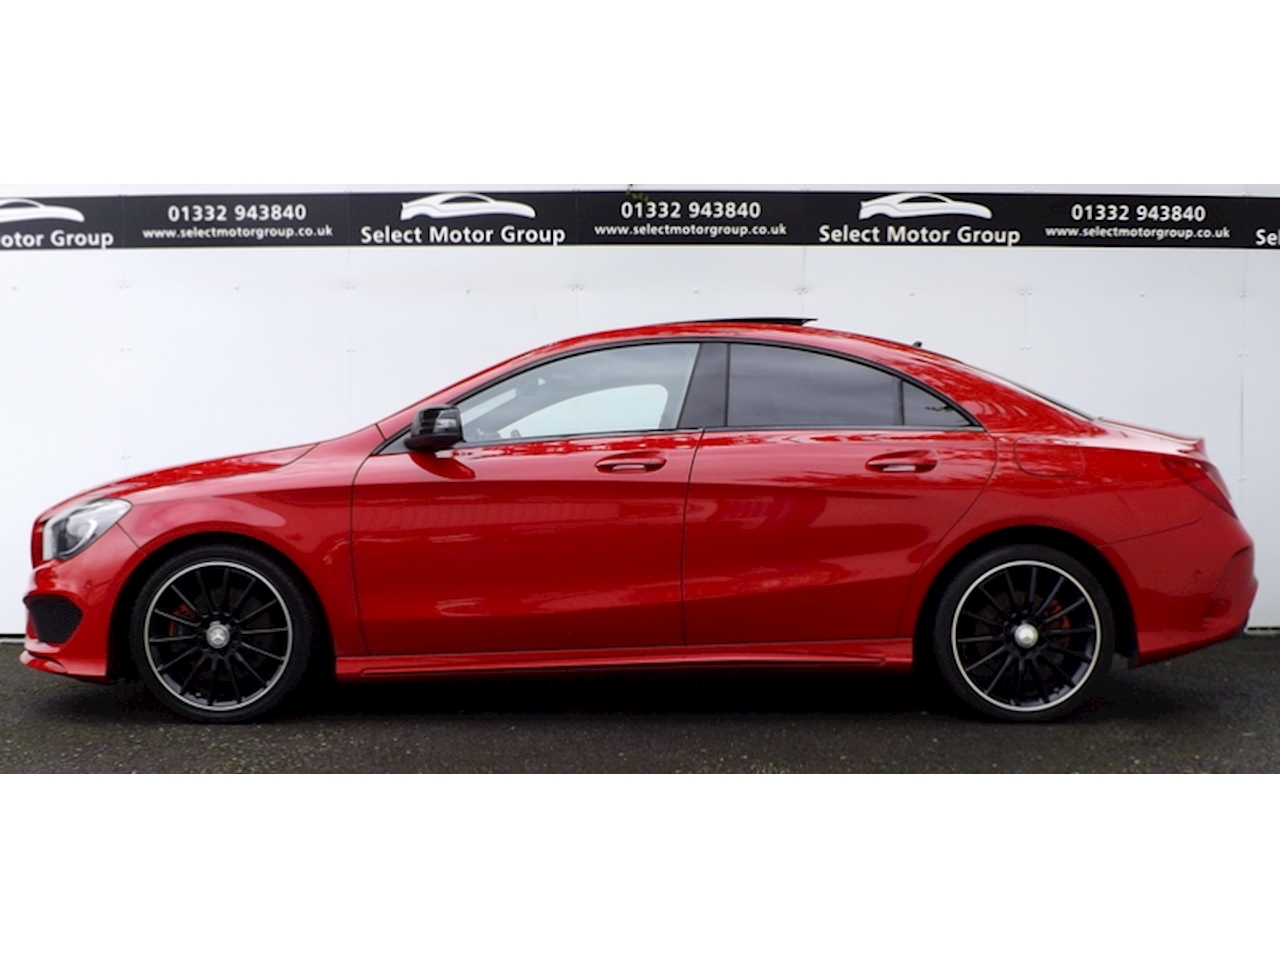 CLA 220 2.0 CDI 177 AMG Sport 4MATIC Coupe 7G-DCT Diesel